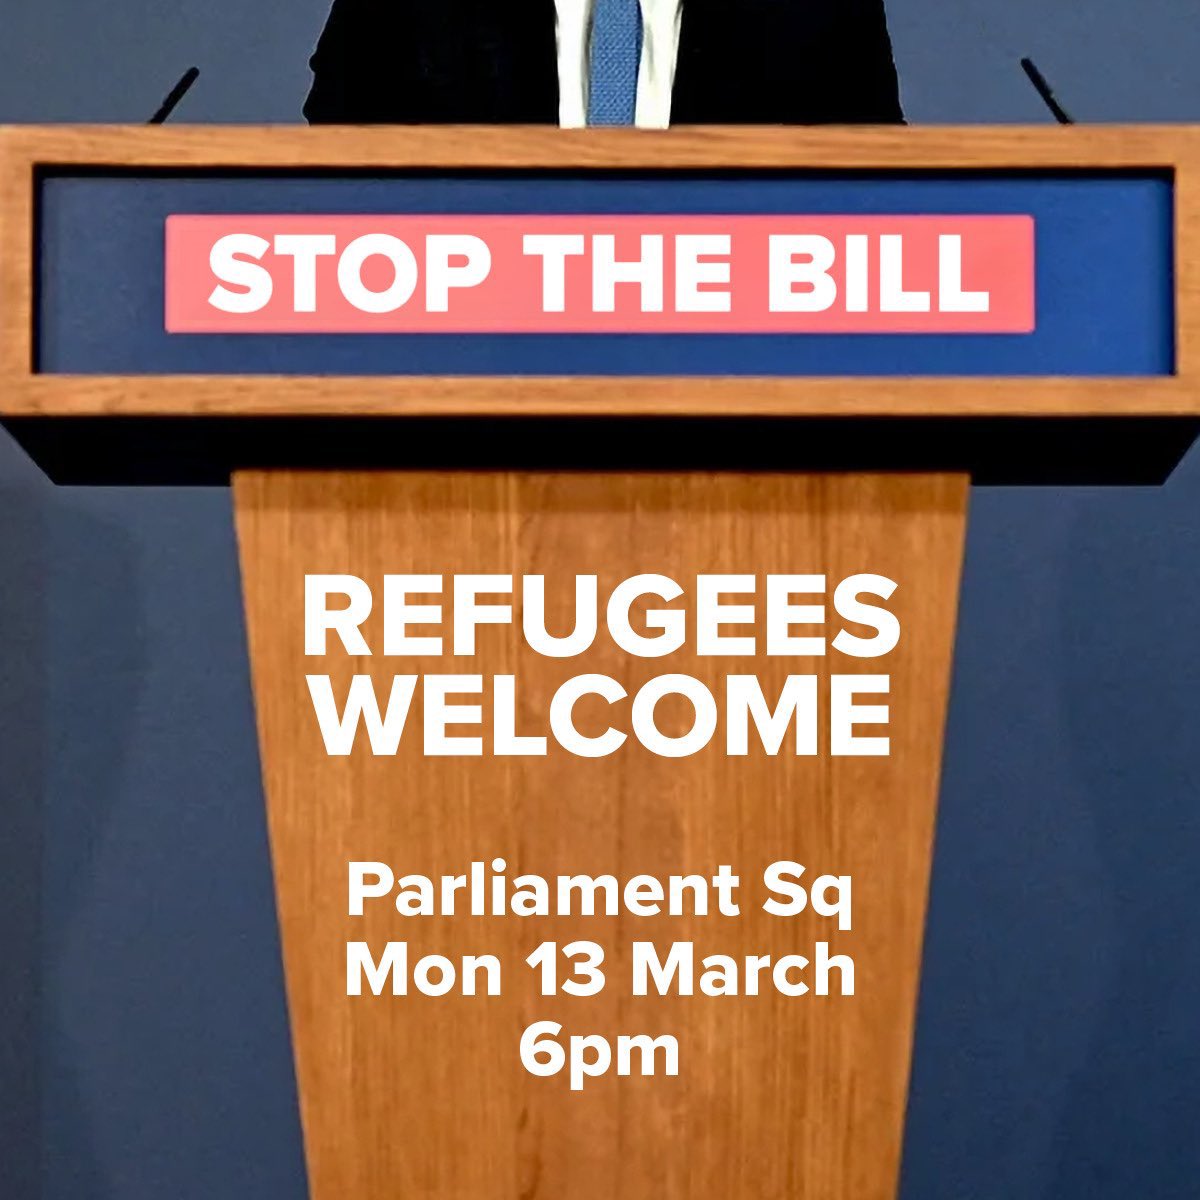 Please join us to oppose the illegal, immoral, cruel and divisive Illegal Migration Bill. #StopTheBill #RefugeesWelcome